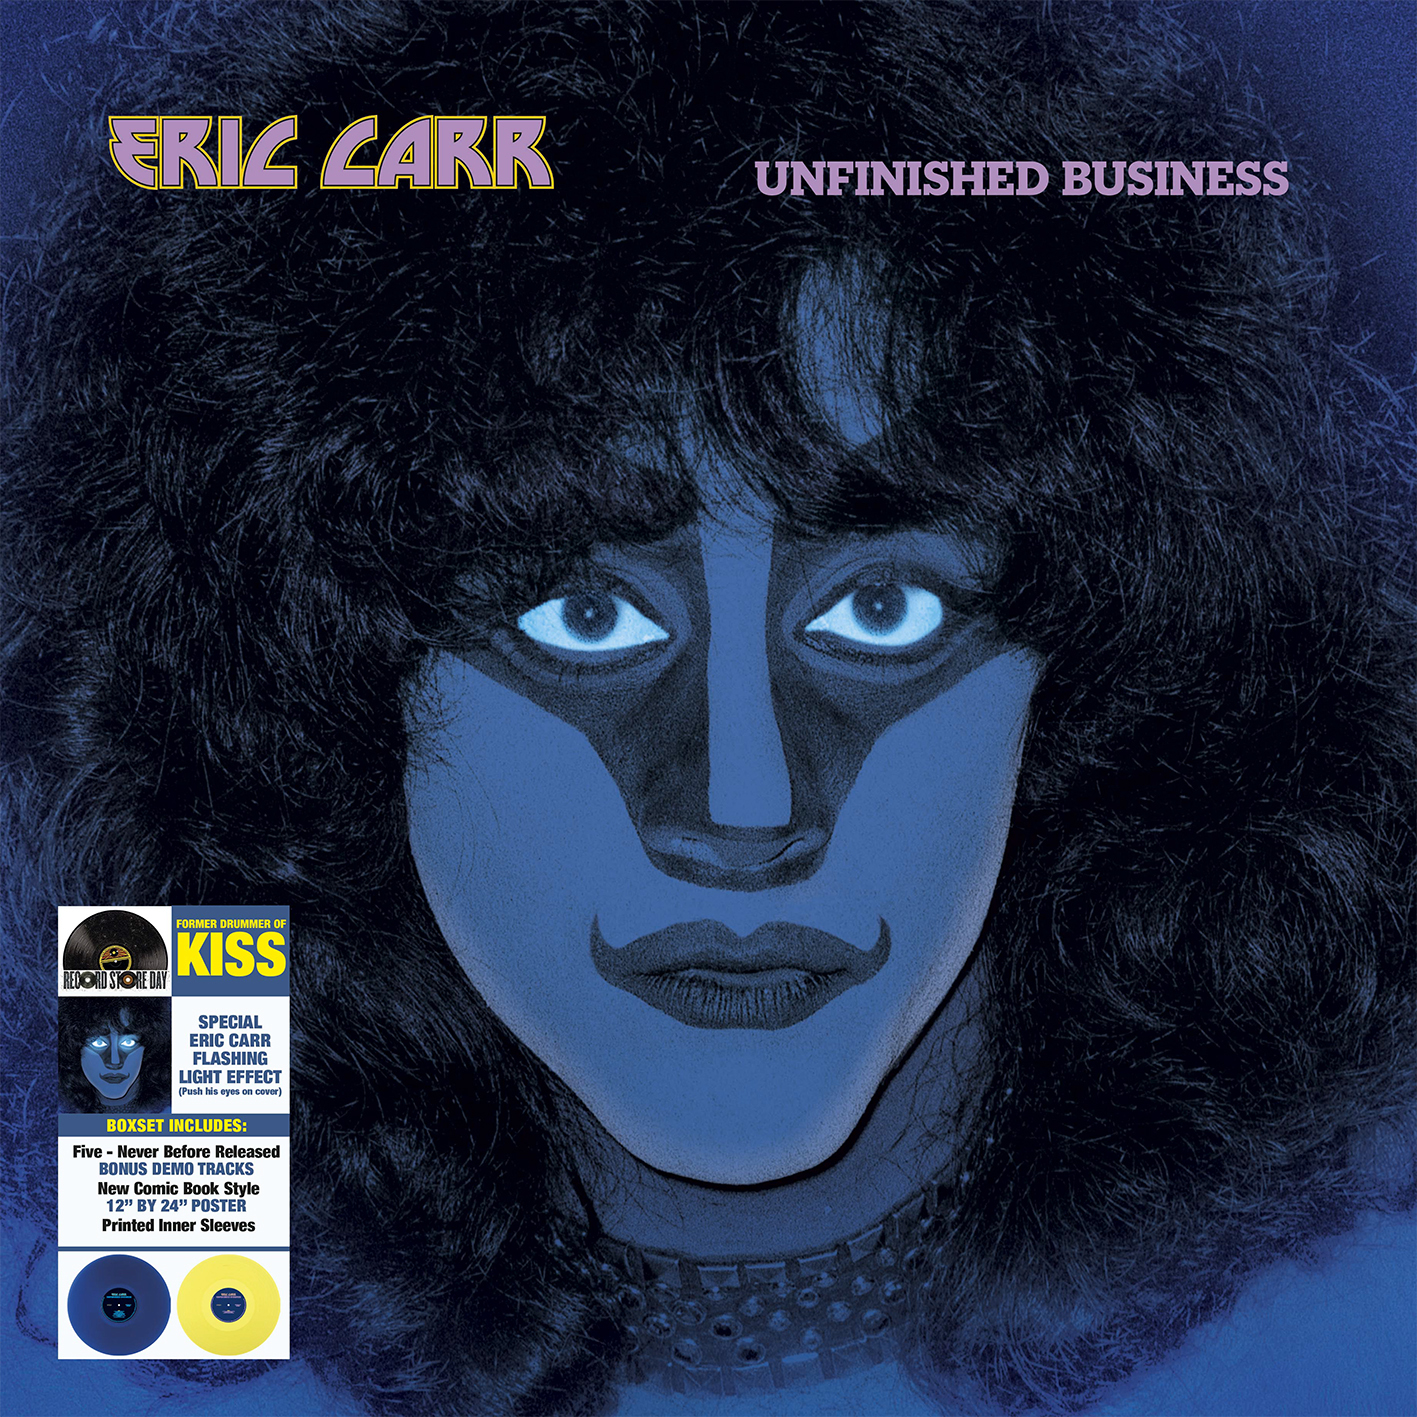 Cover-Vinyl-Eric-Carr-Unfinished-Business-With-Sticker